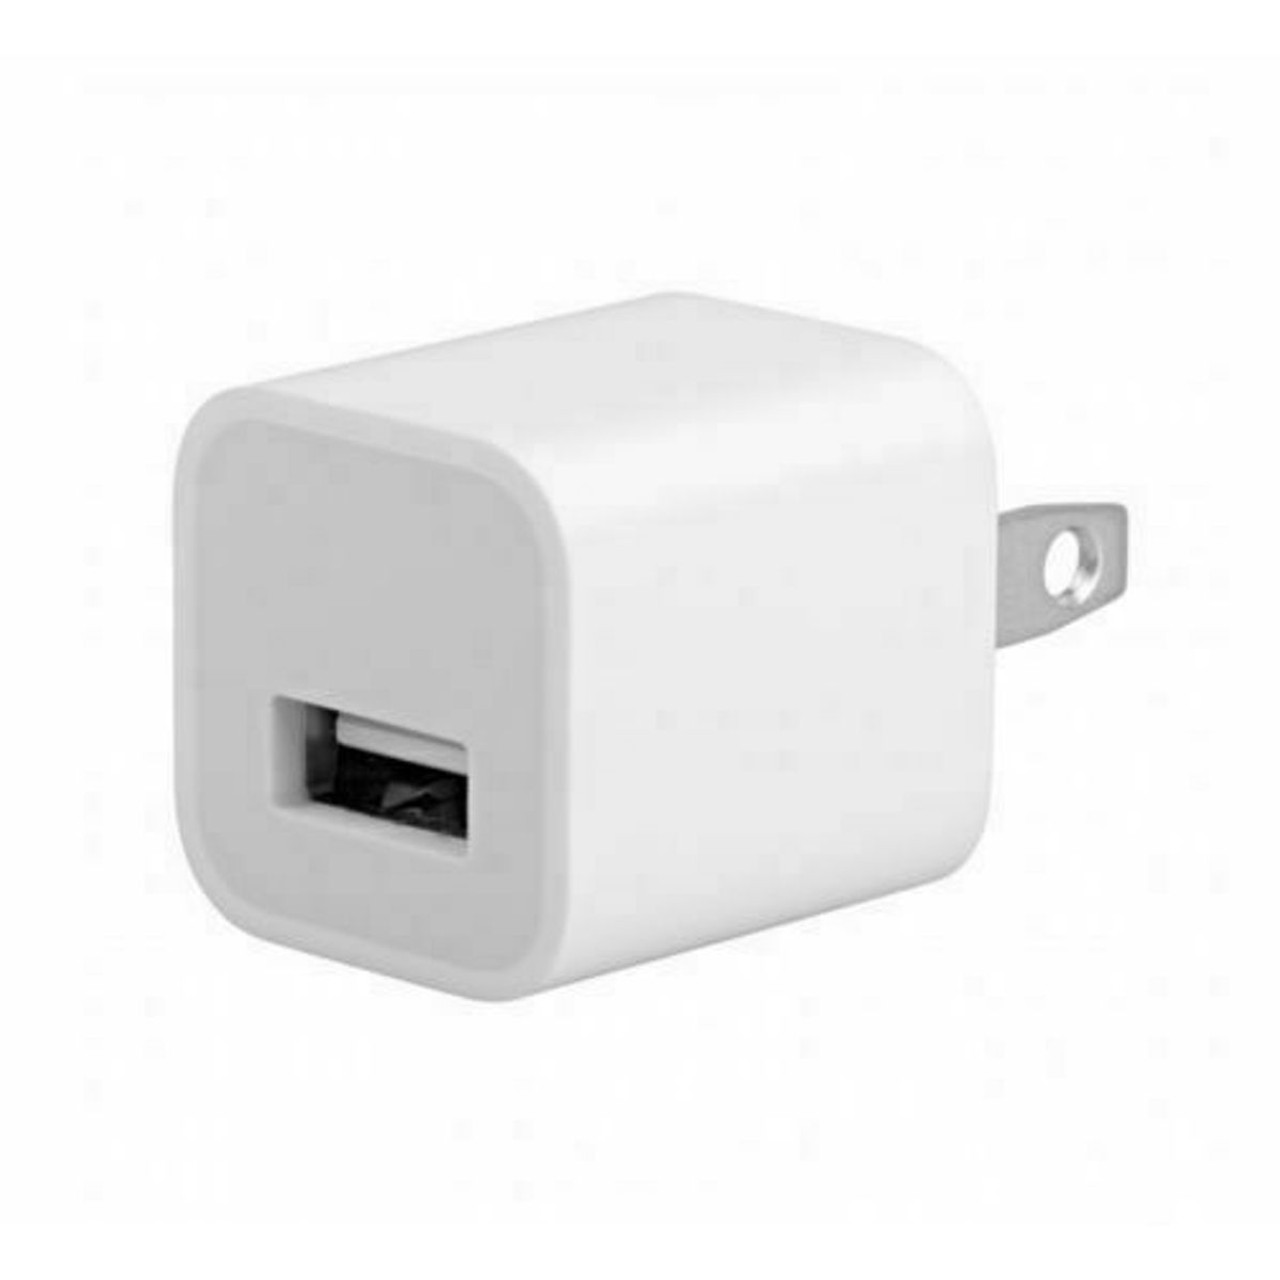 Apple 5W USB Power Adapter MD810LL/A product image